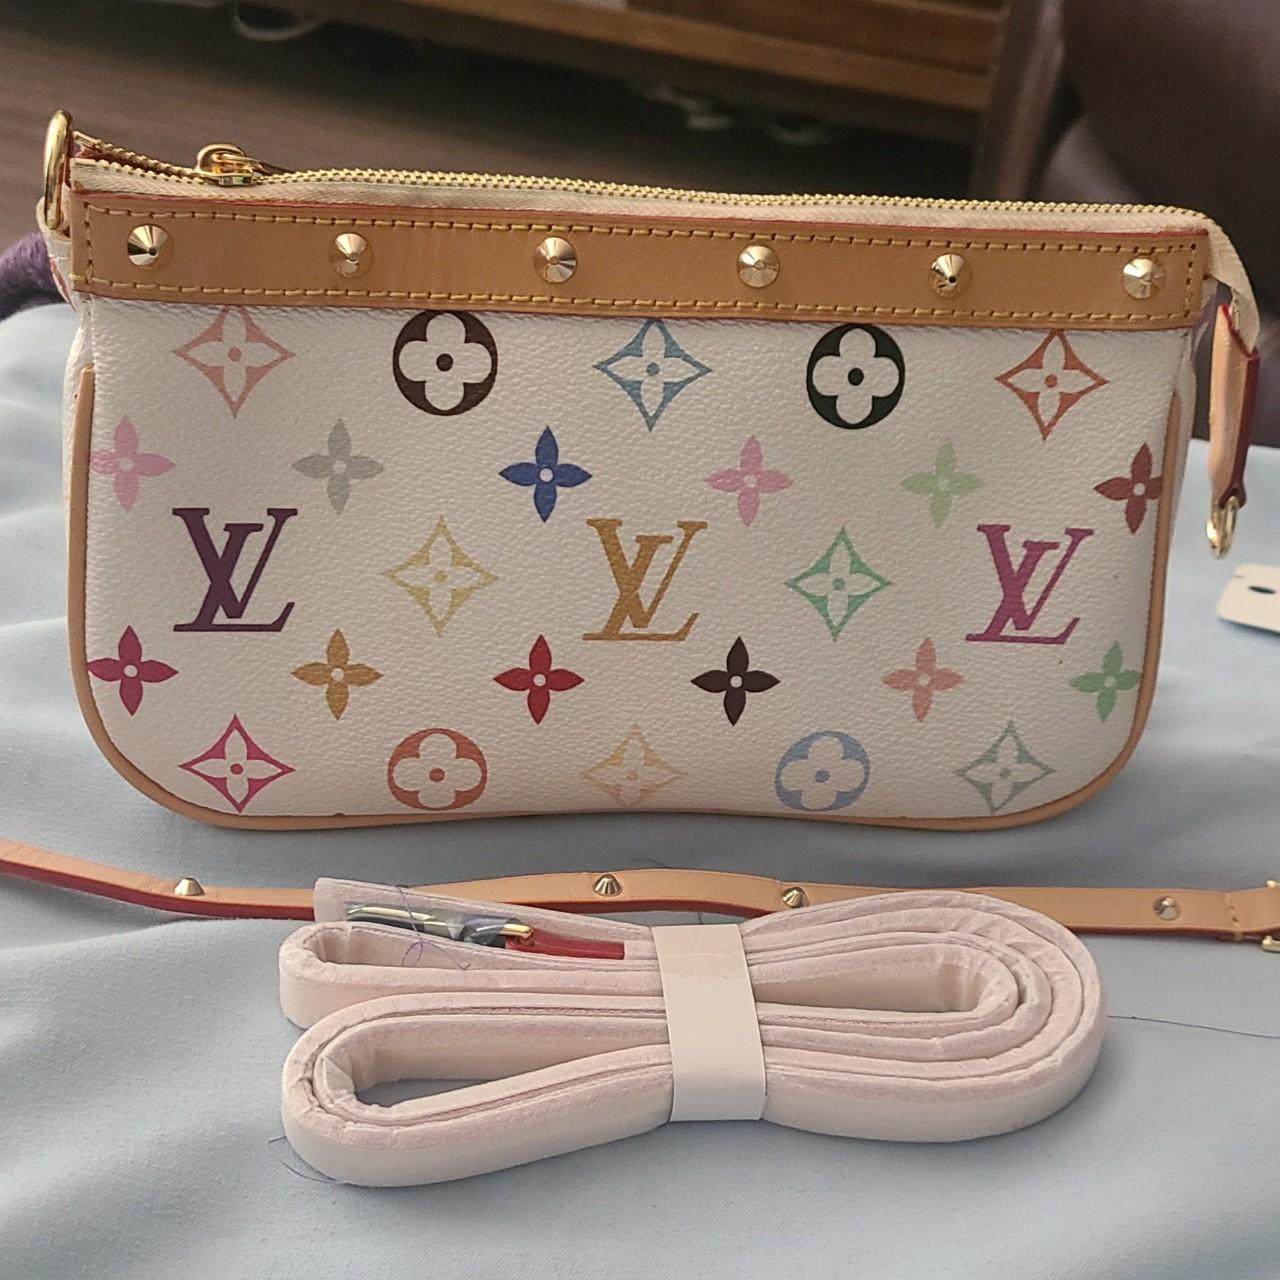 Louis Vuitton, Other, L0king 4 This